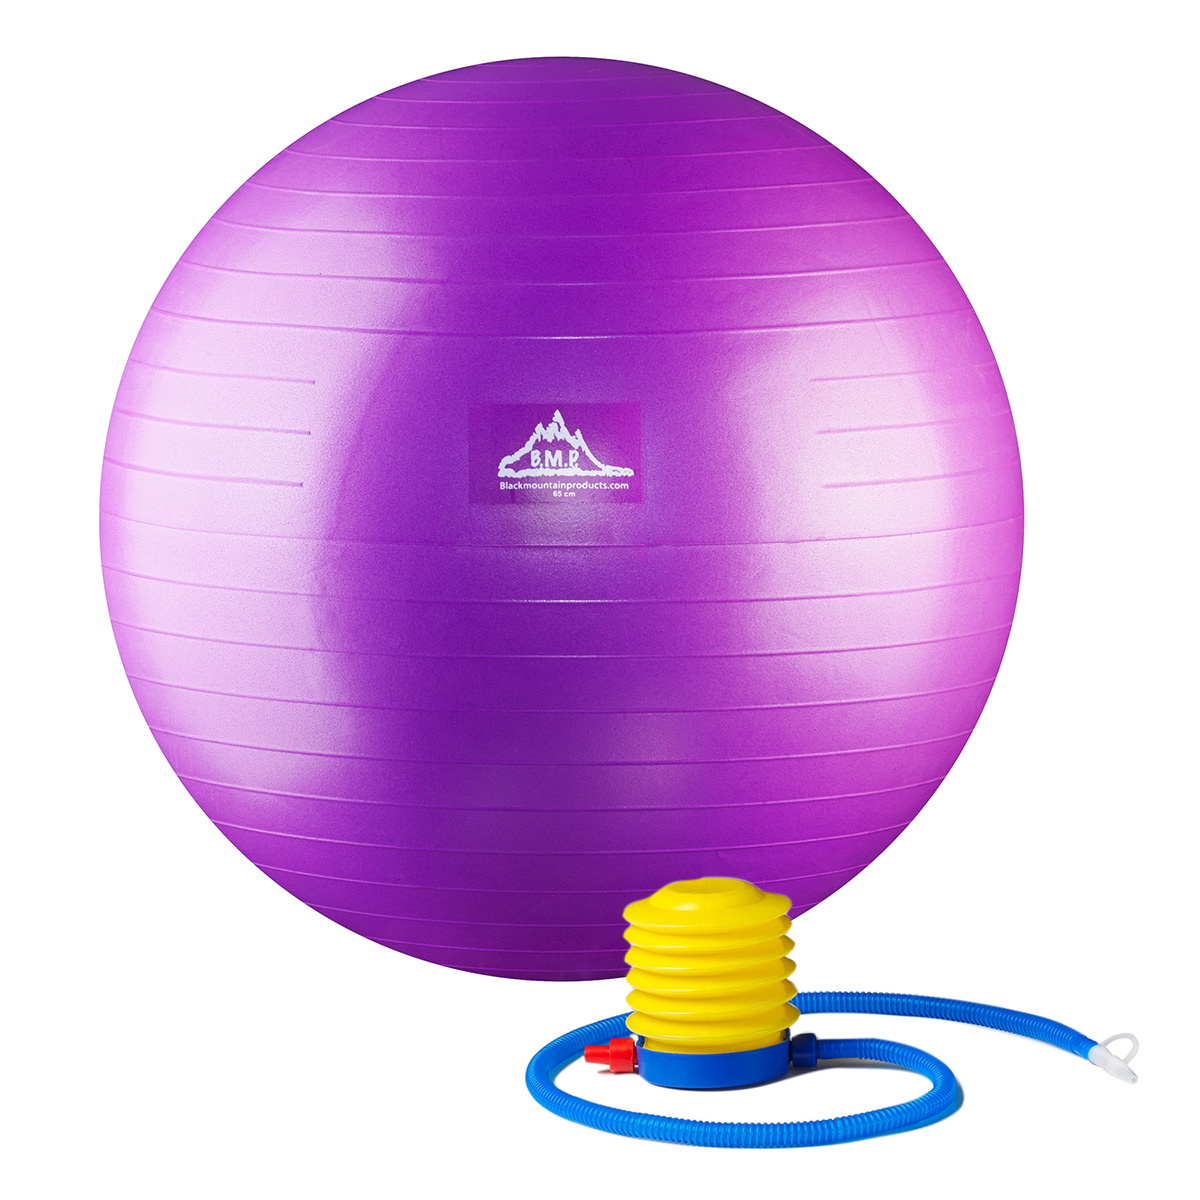 https://blackmountainproducts.com/wp-content/uploads/2016/01/Professional-Stability-Ball-Purple.jpg